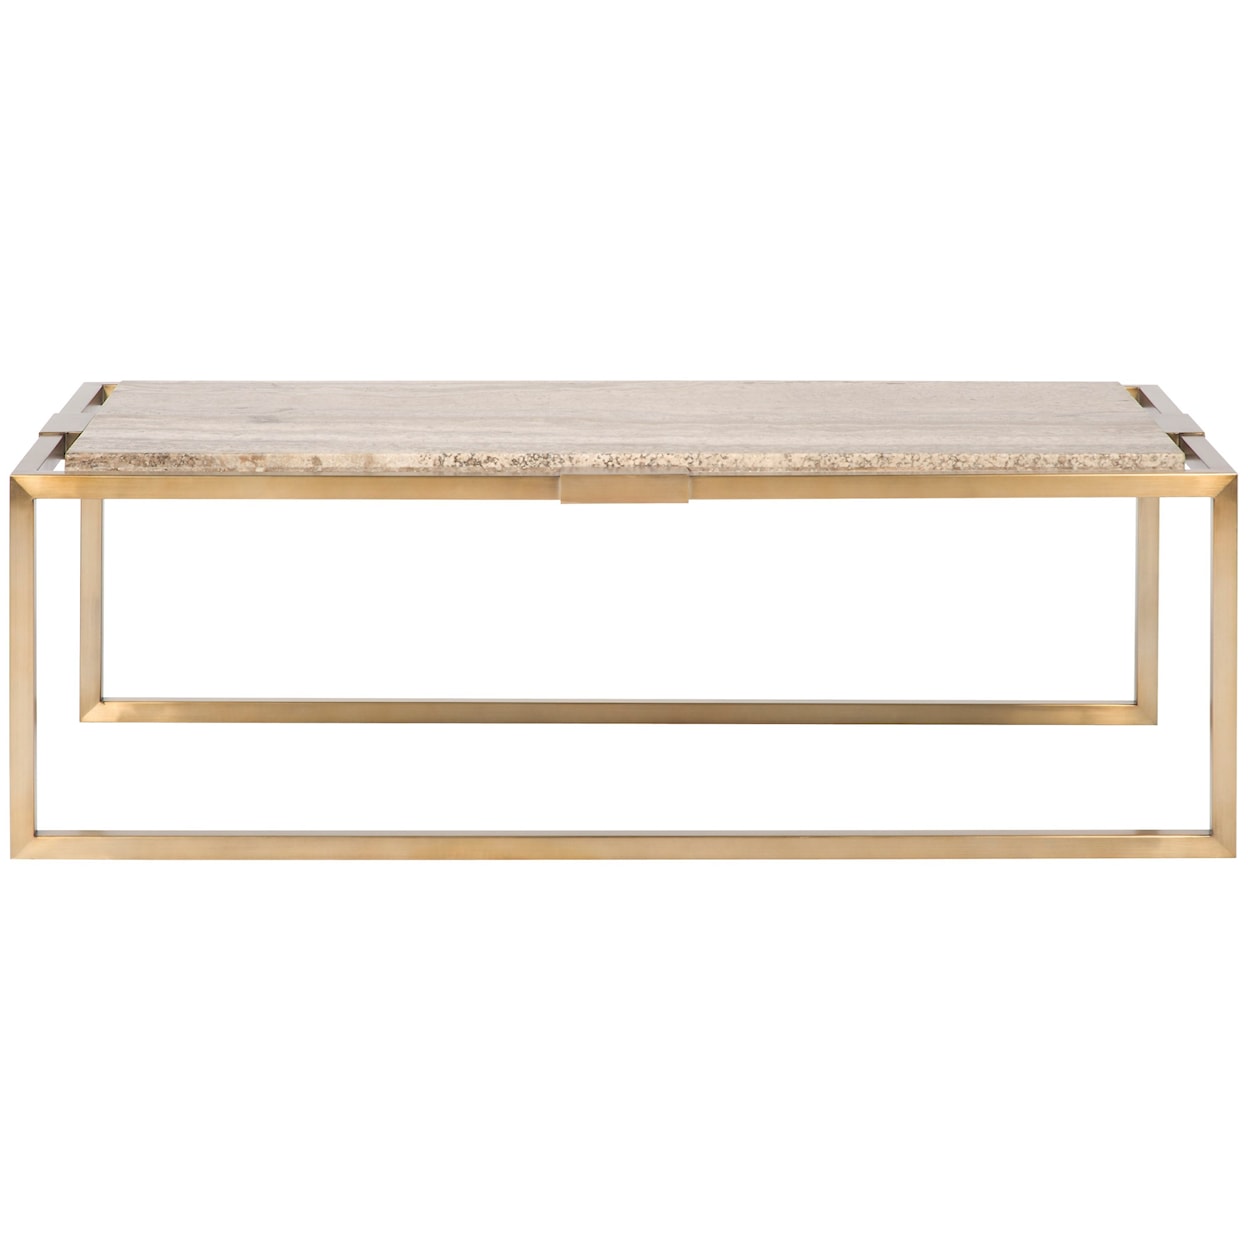 Vanguard Furniture Willet by Thom Filicia Home Cocktail Table